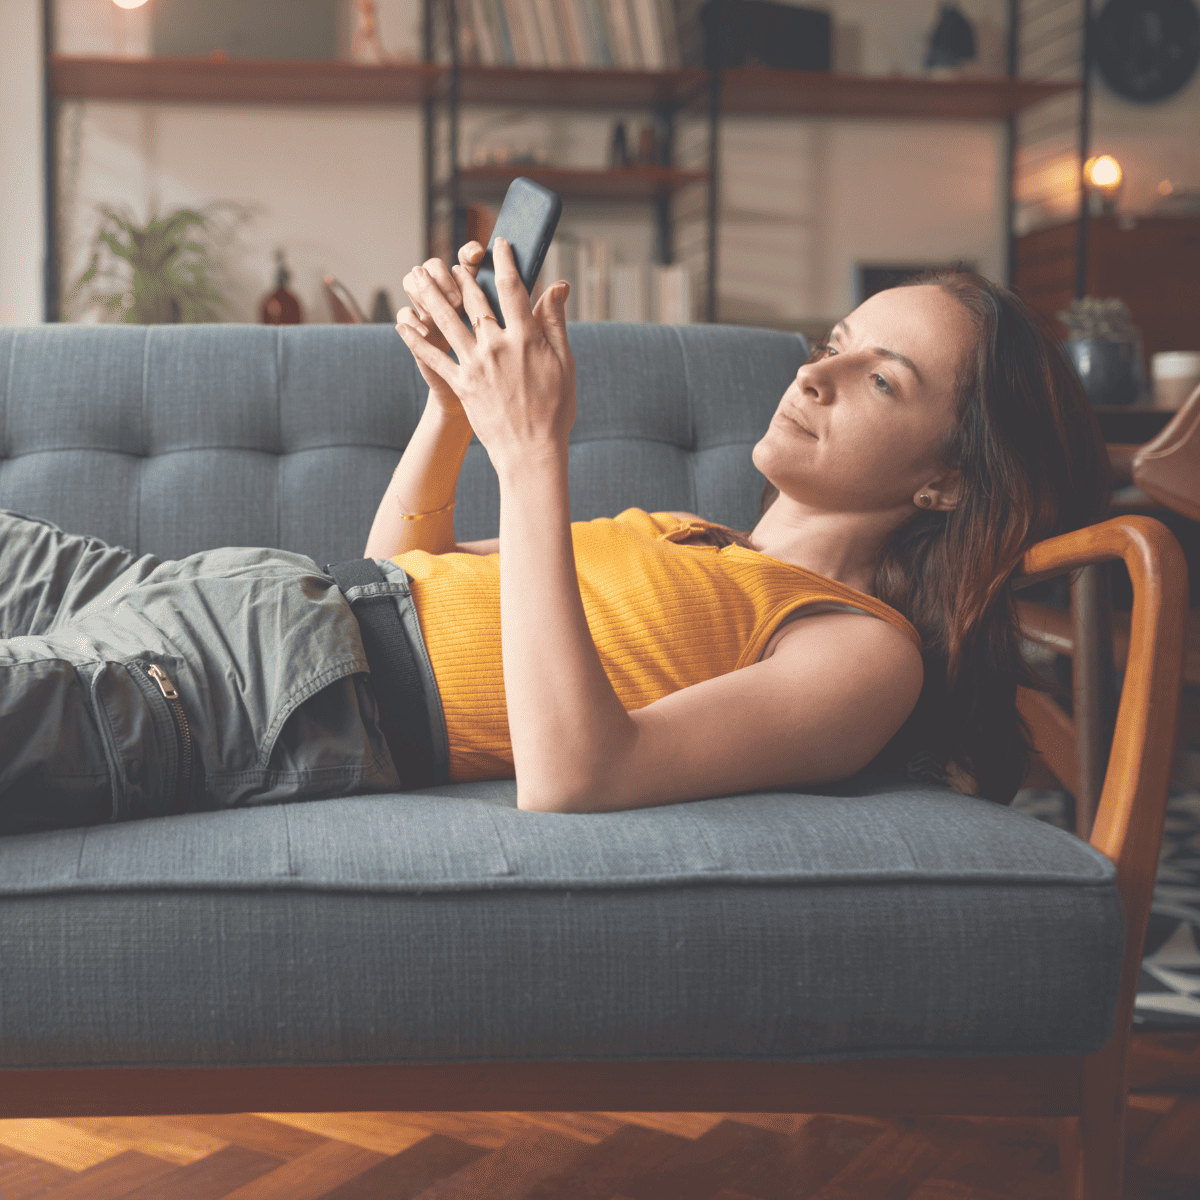 A woman lying on a couch struggling with the FOMO as she scrolls on her phone.